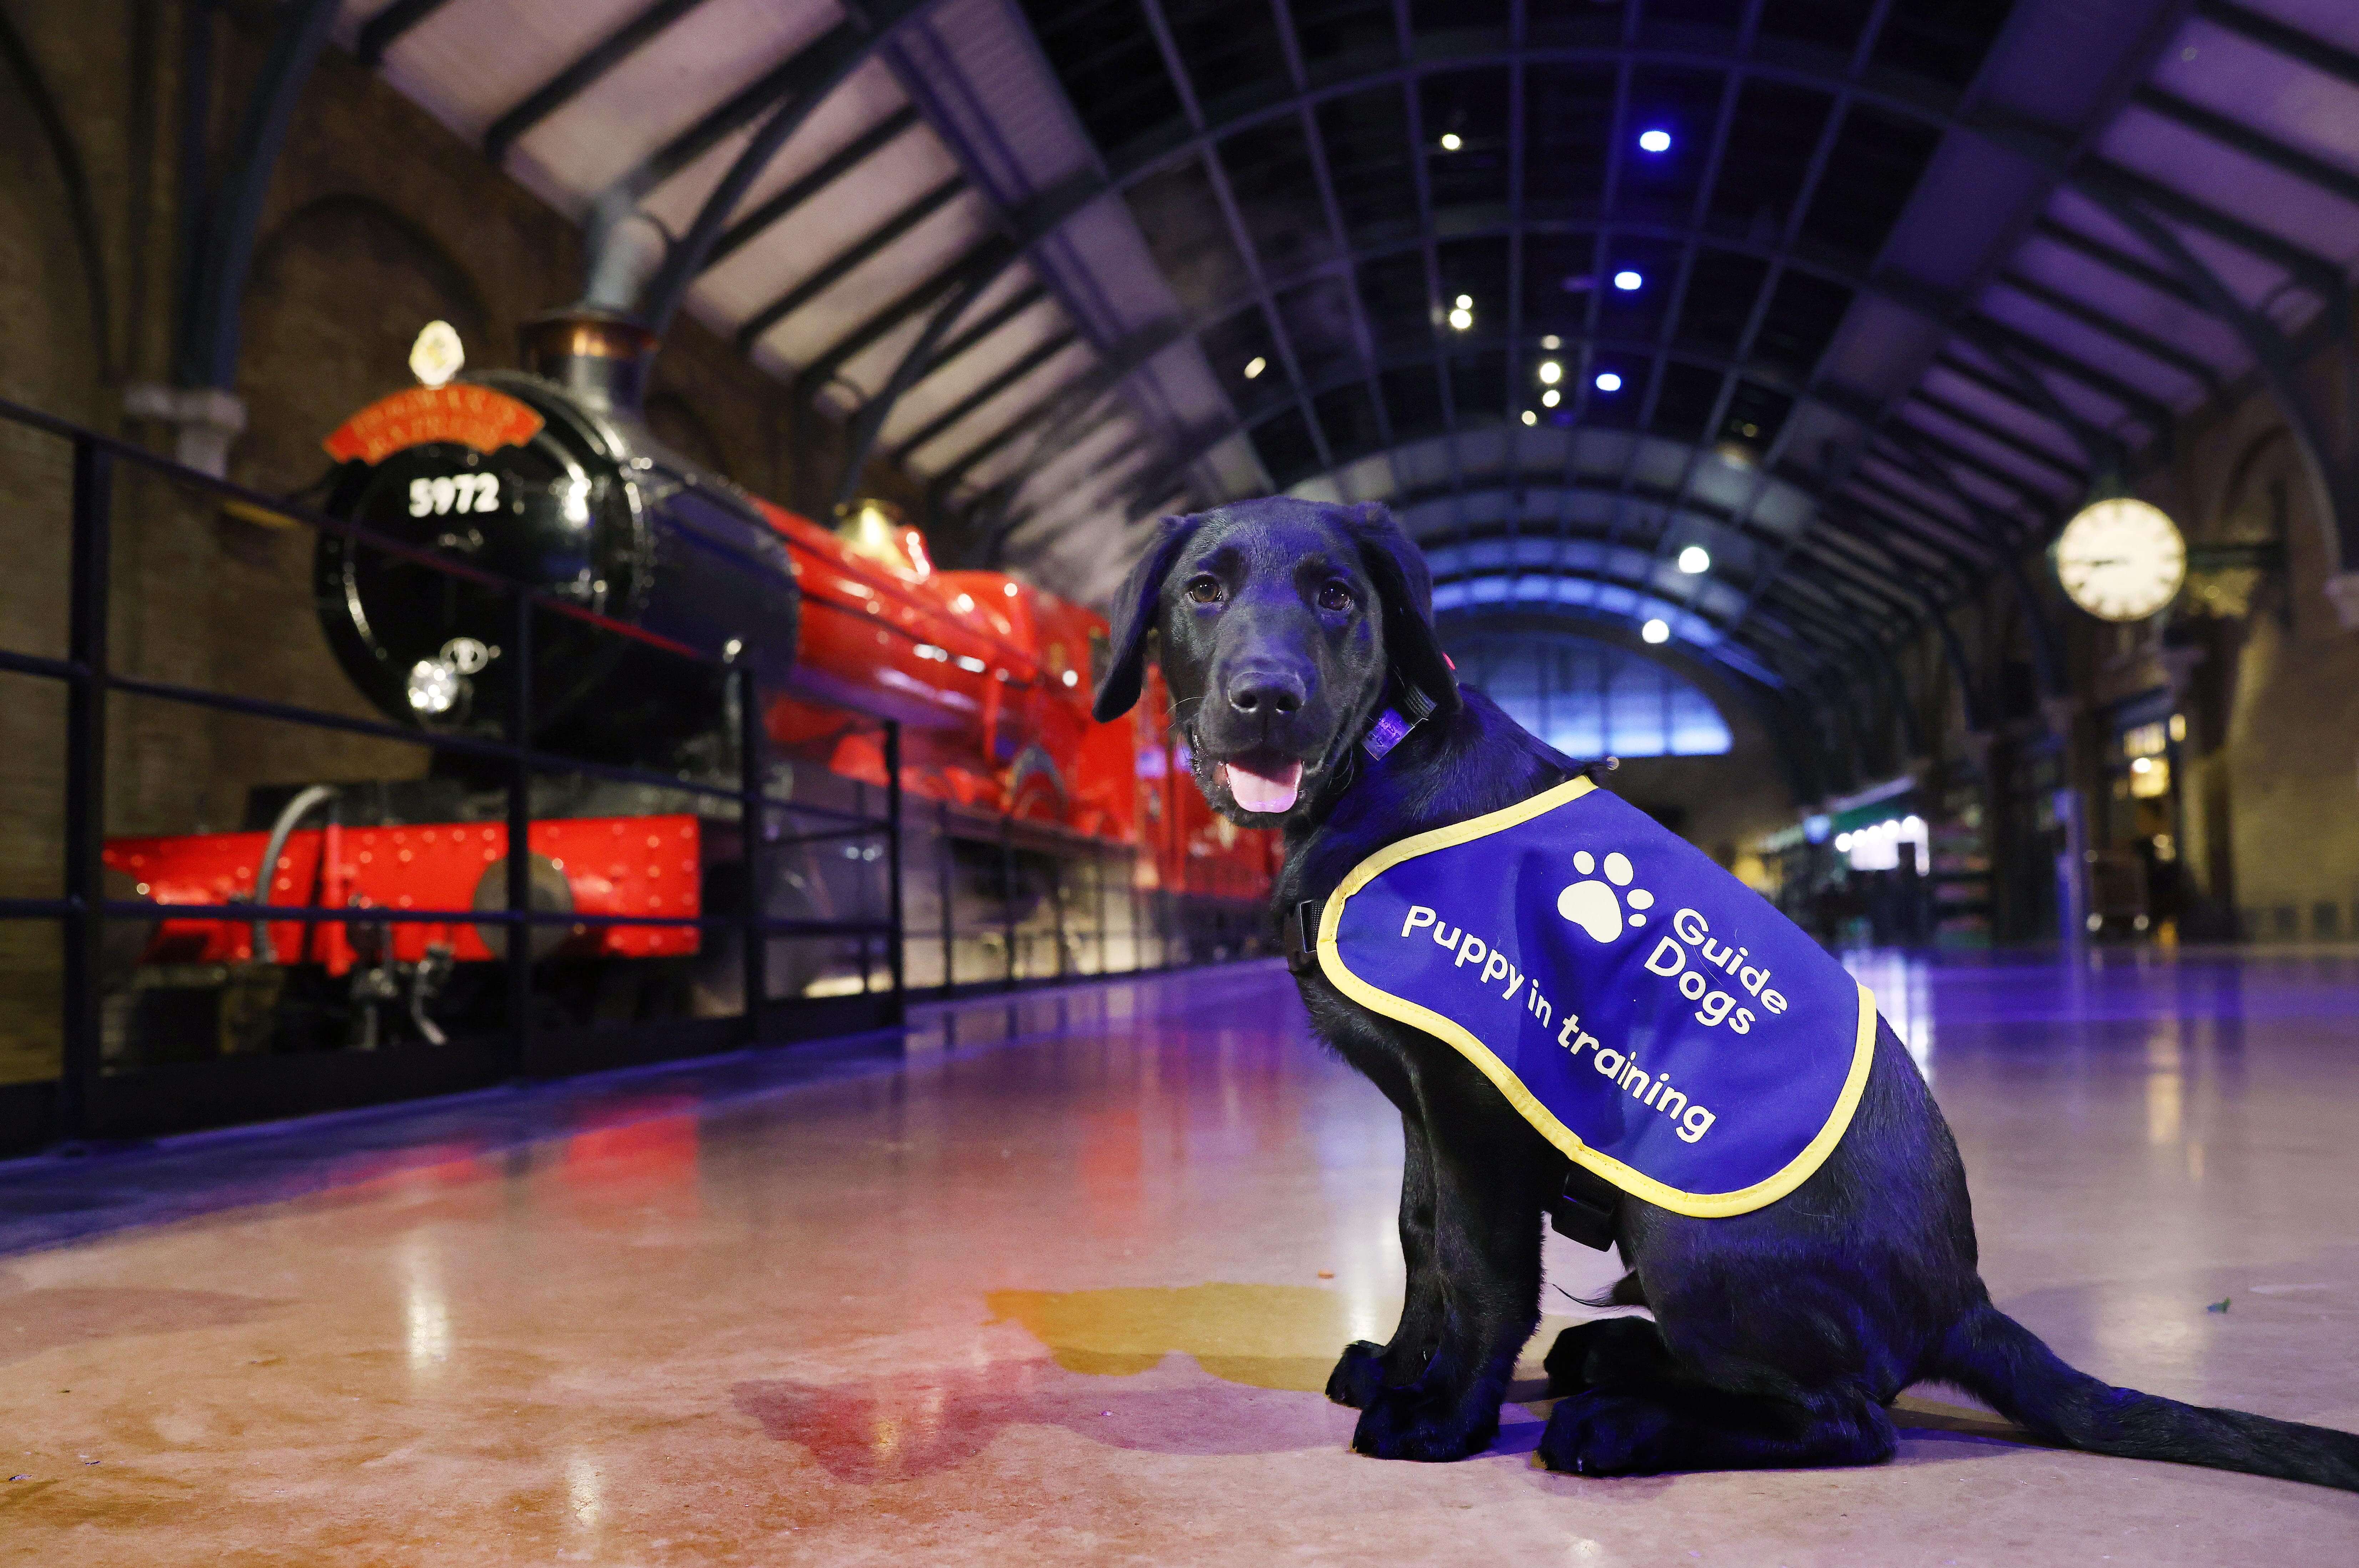 14-week-old black Labrador Puppy Harry sat in front of the red and black Hogwarts Express steam train